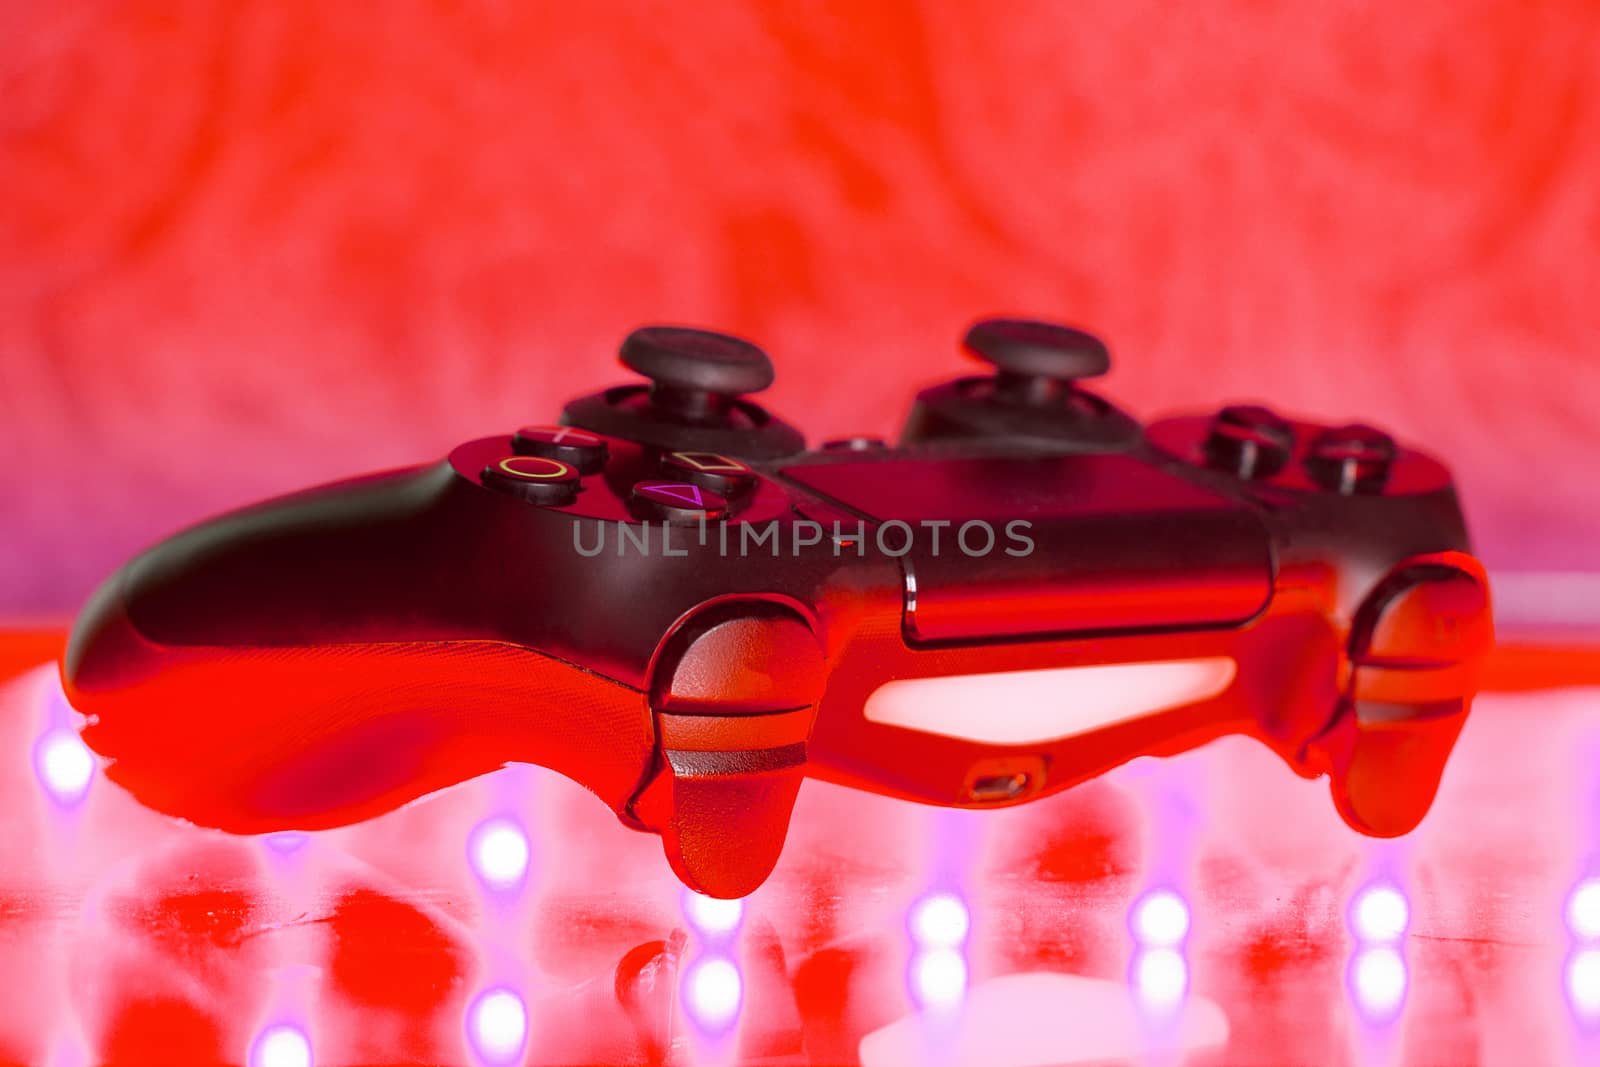 Game controller on illuminated by liwei12